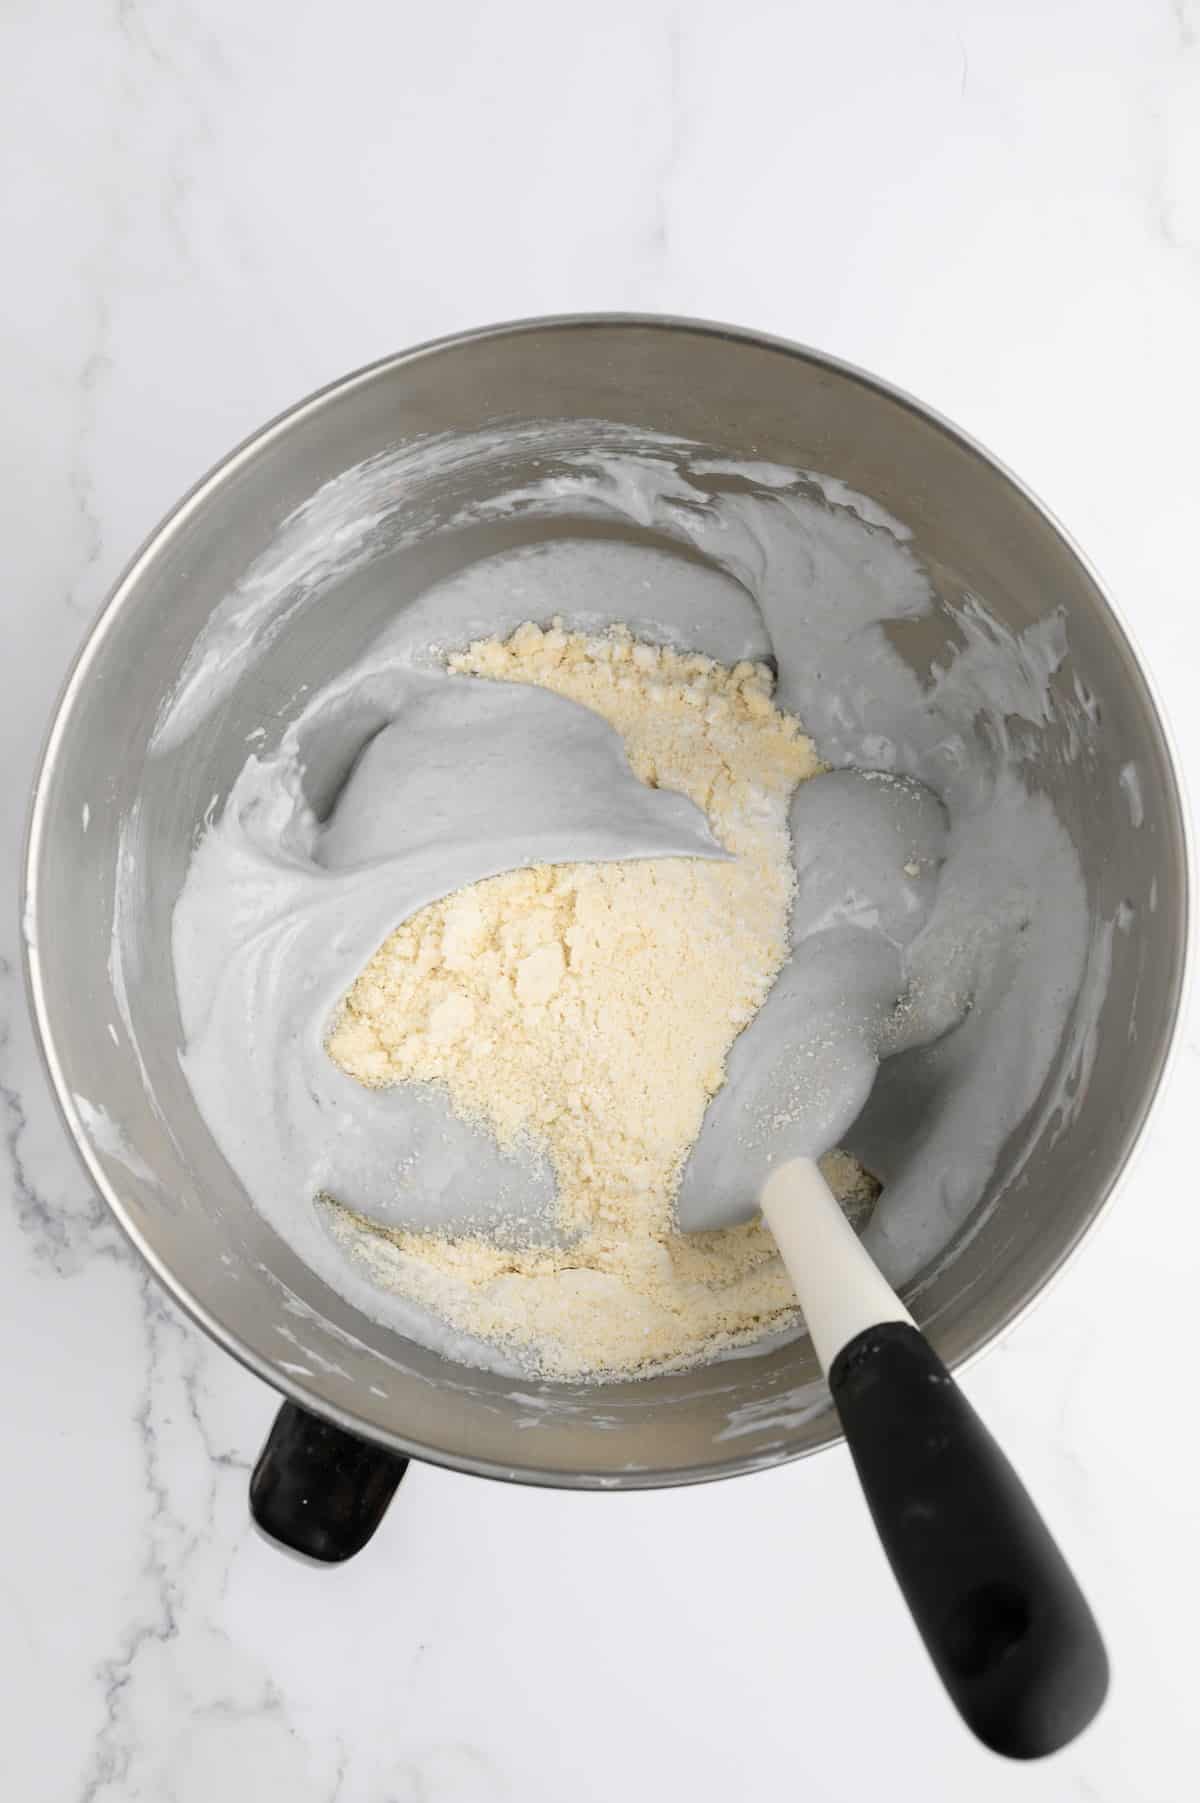 Folding the almond flour mixture into the aquafaba mixture with a rubber spatula.